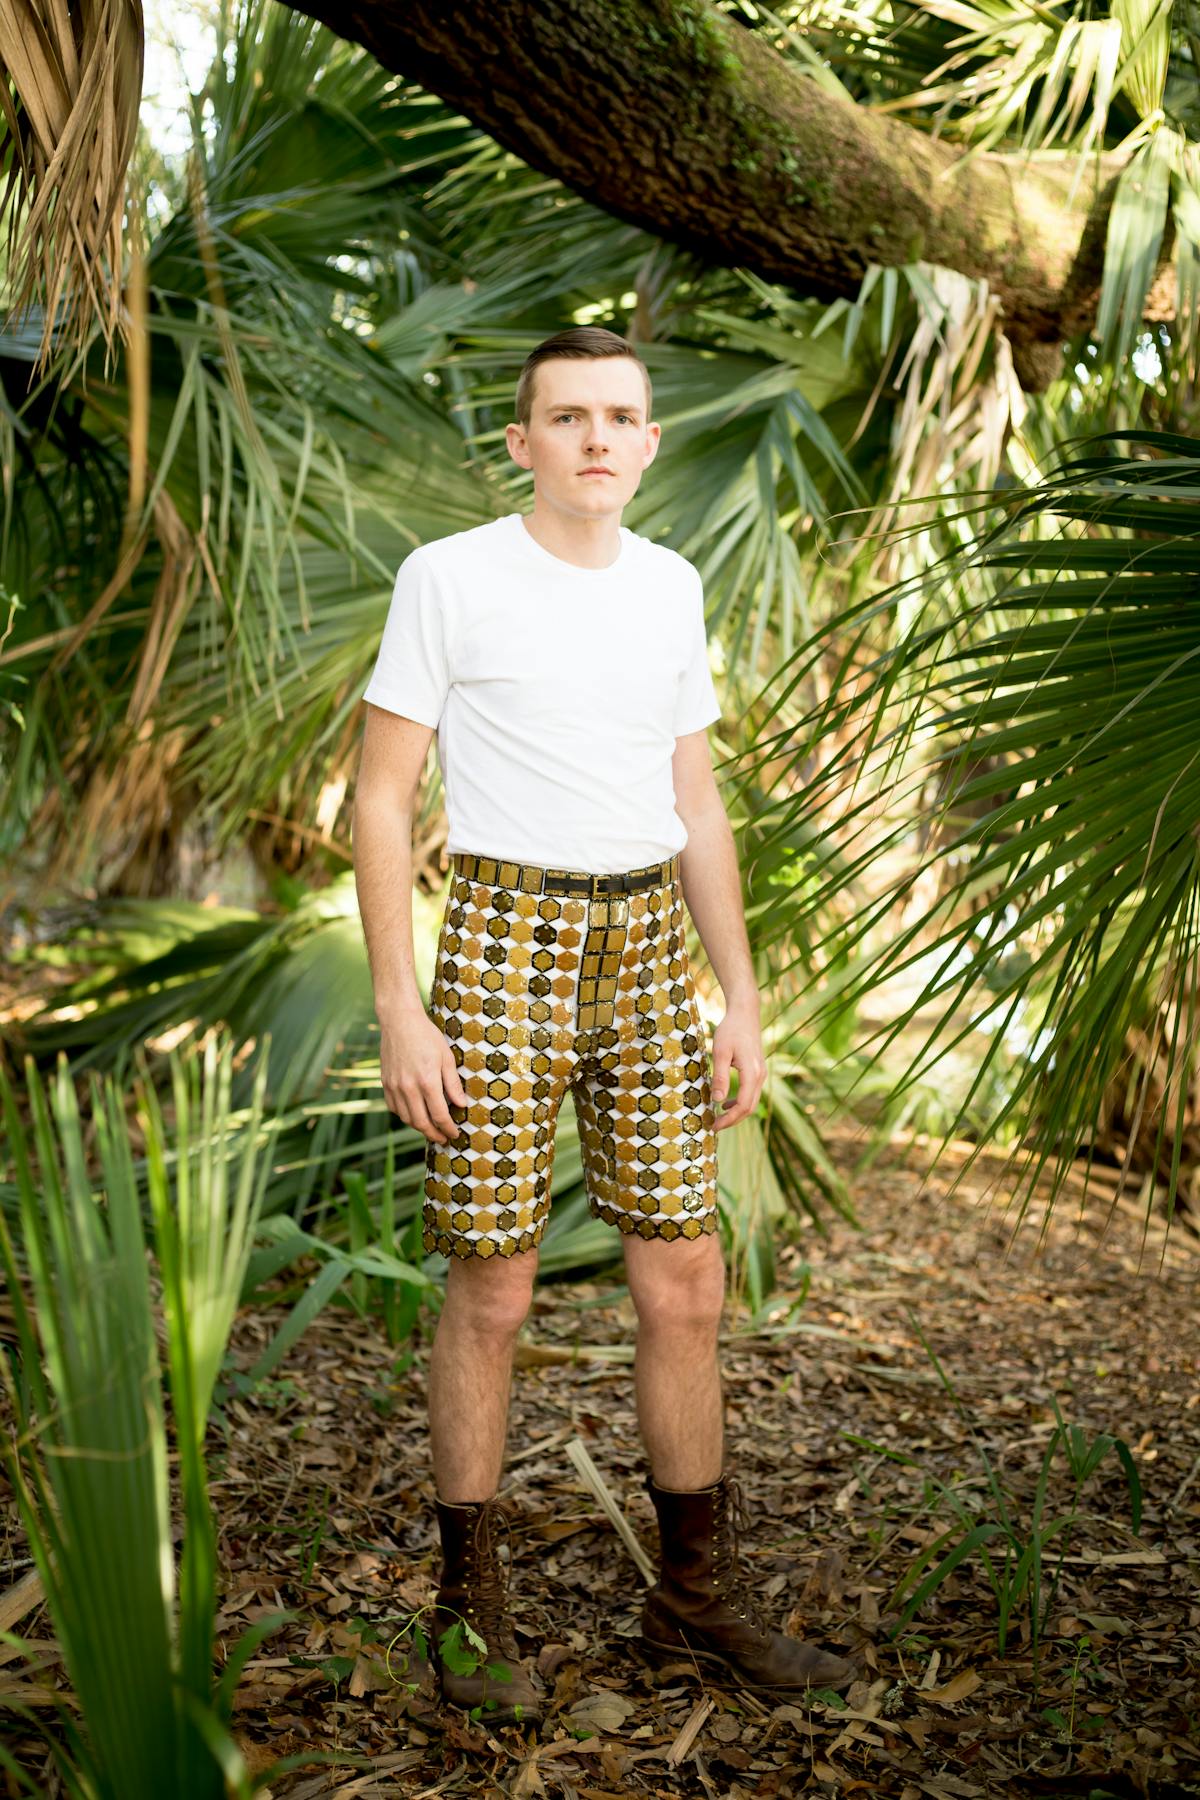 shae bishop standing in forest wearing white shirt and shorts made from brown ceramic tiles 